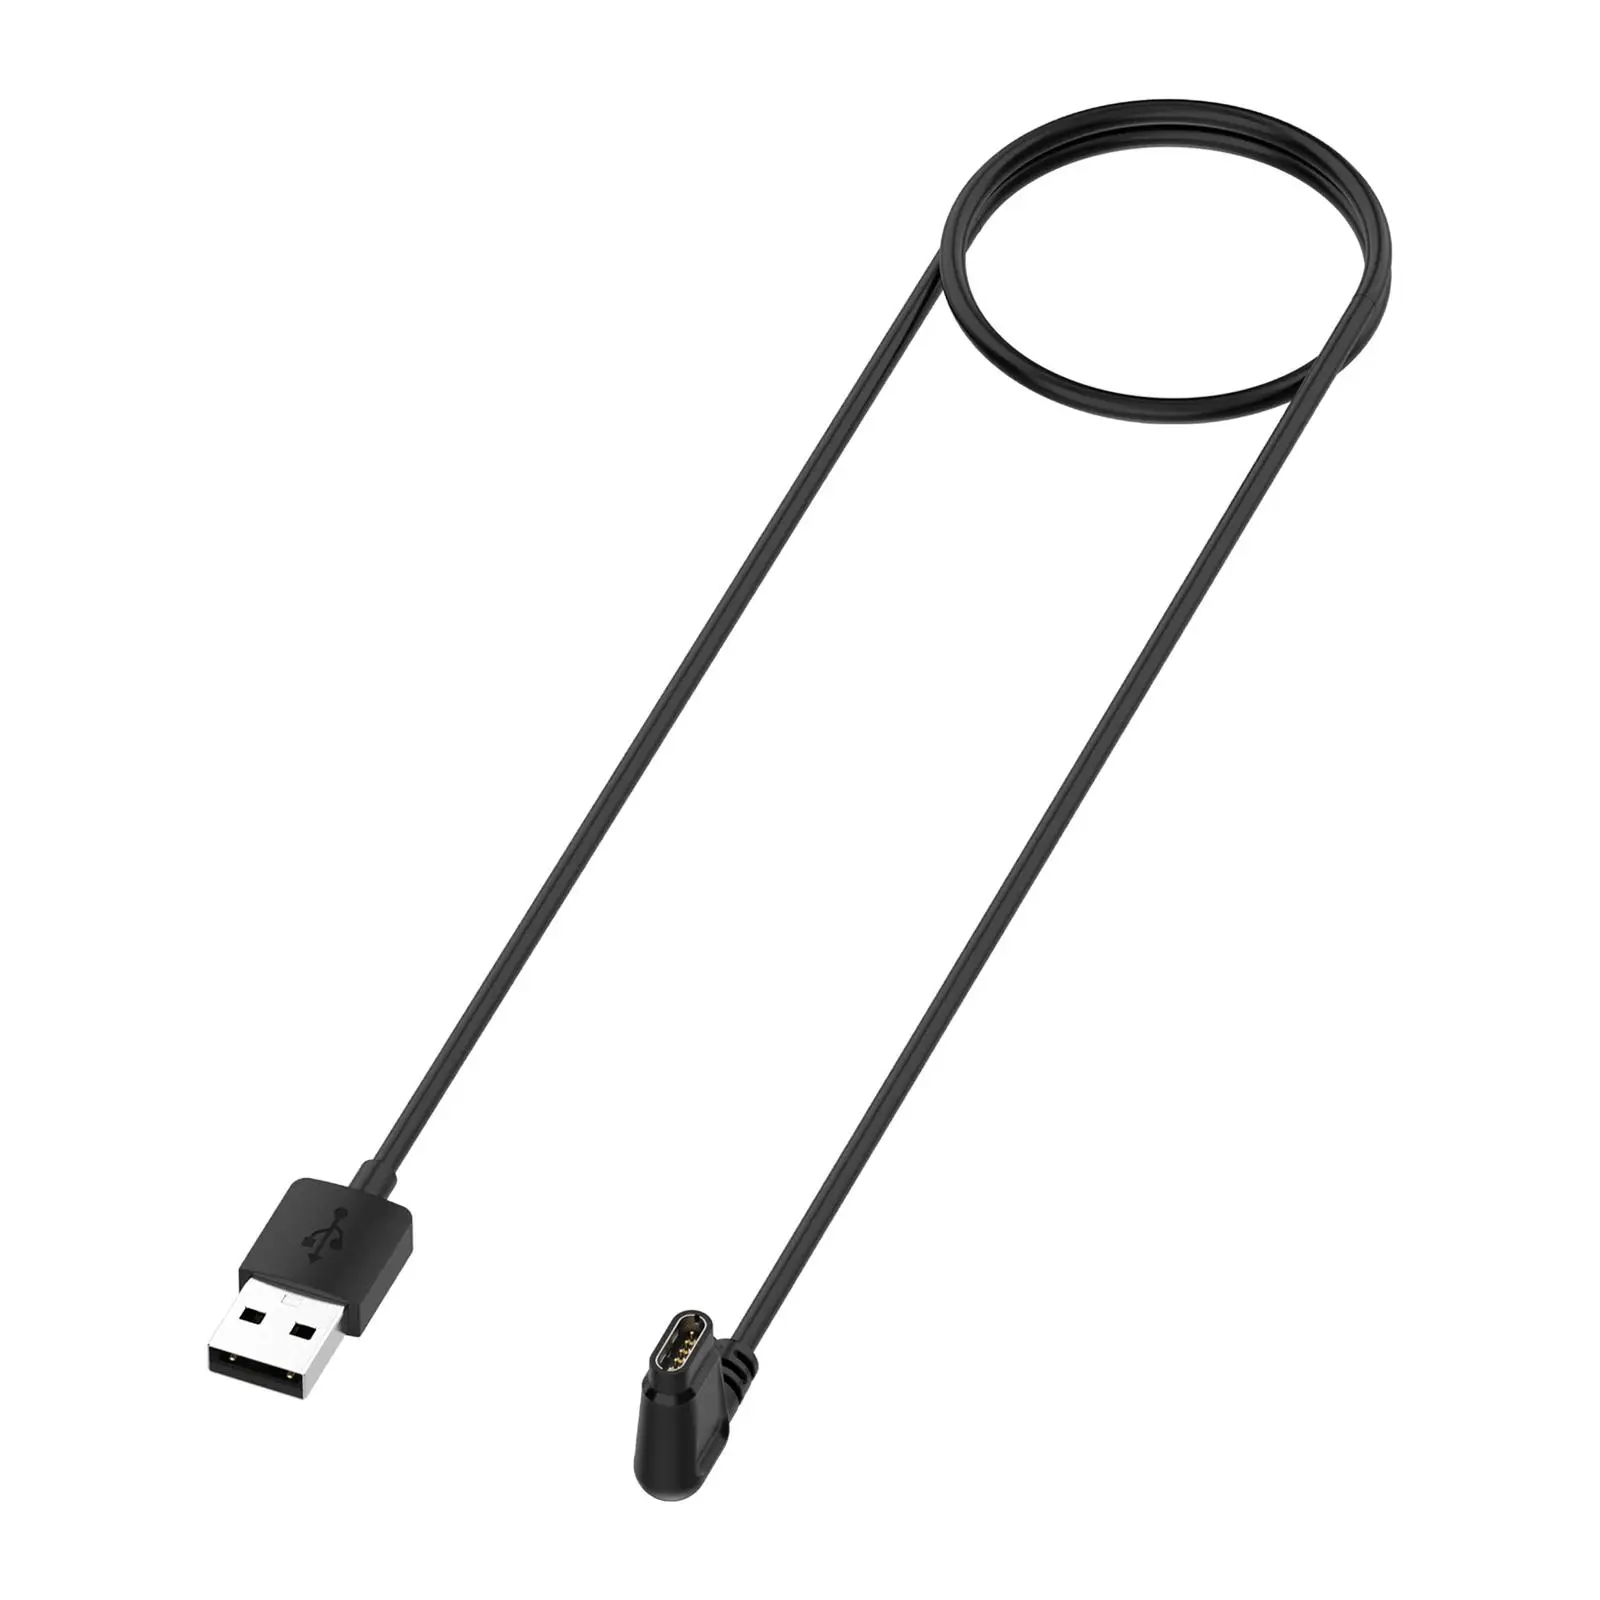 USB Charging Cable with Data Transfer 1M/3.3ft Black Replacement Charging Cord for Falcon A2029 Smartwatch Accessories